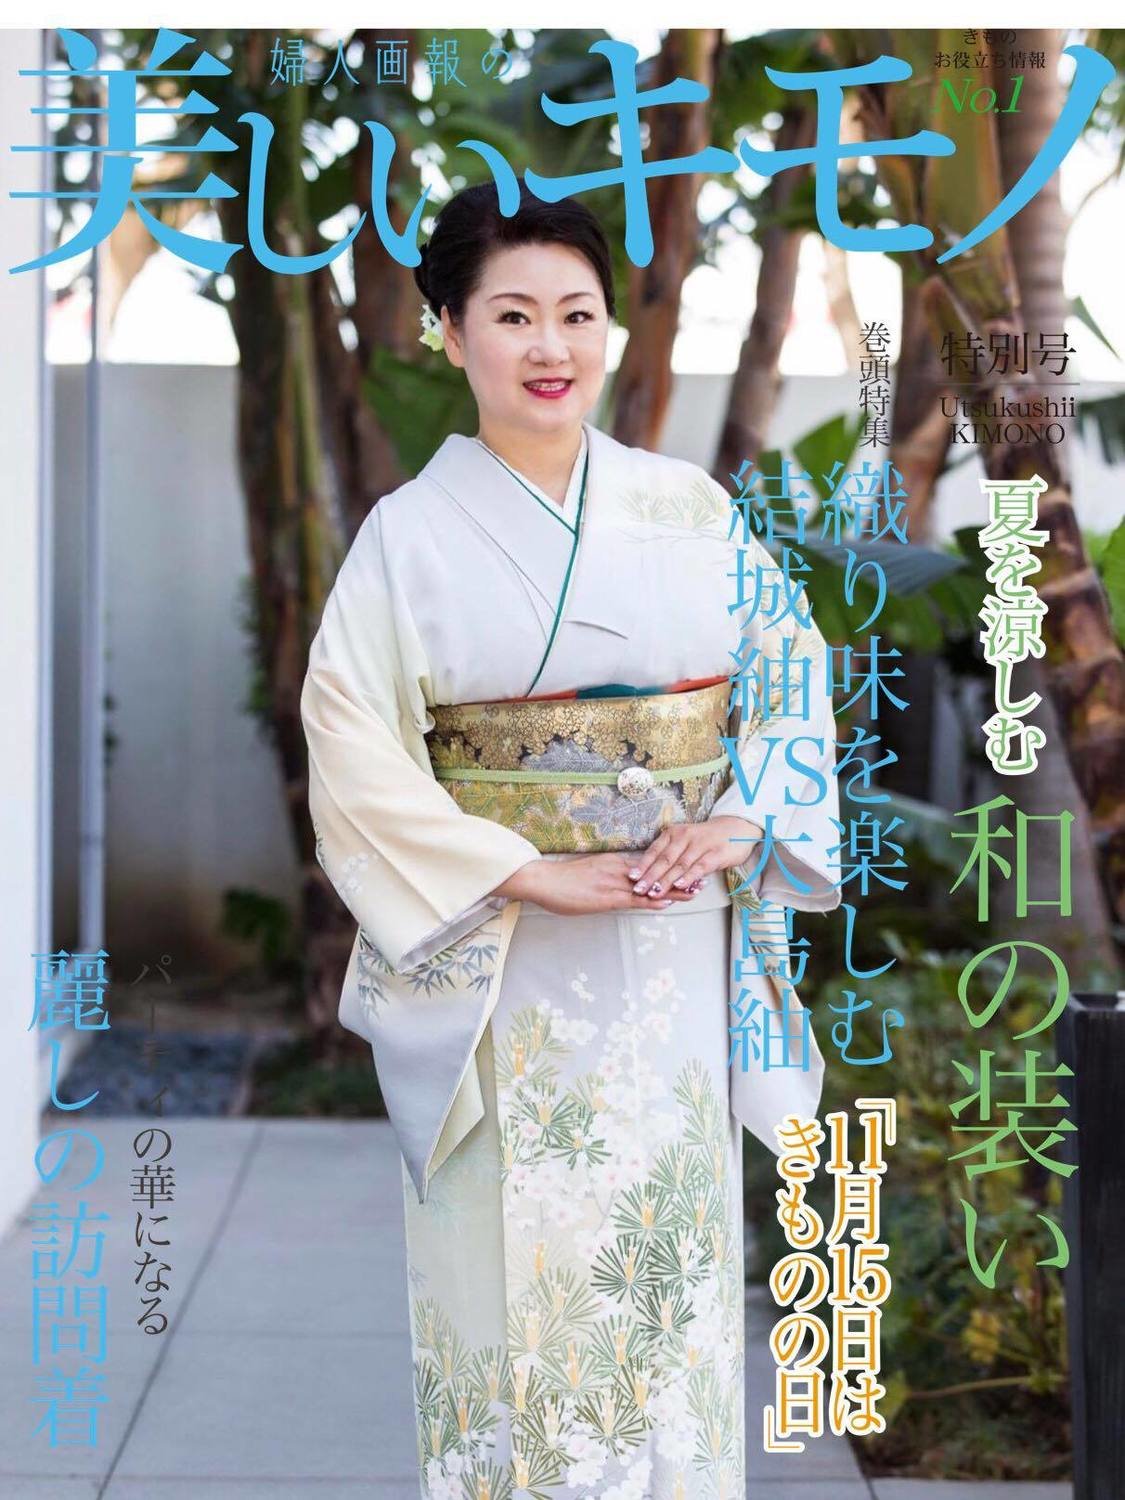 ⑬ Kimono rental and dressing for mother